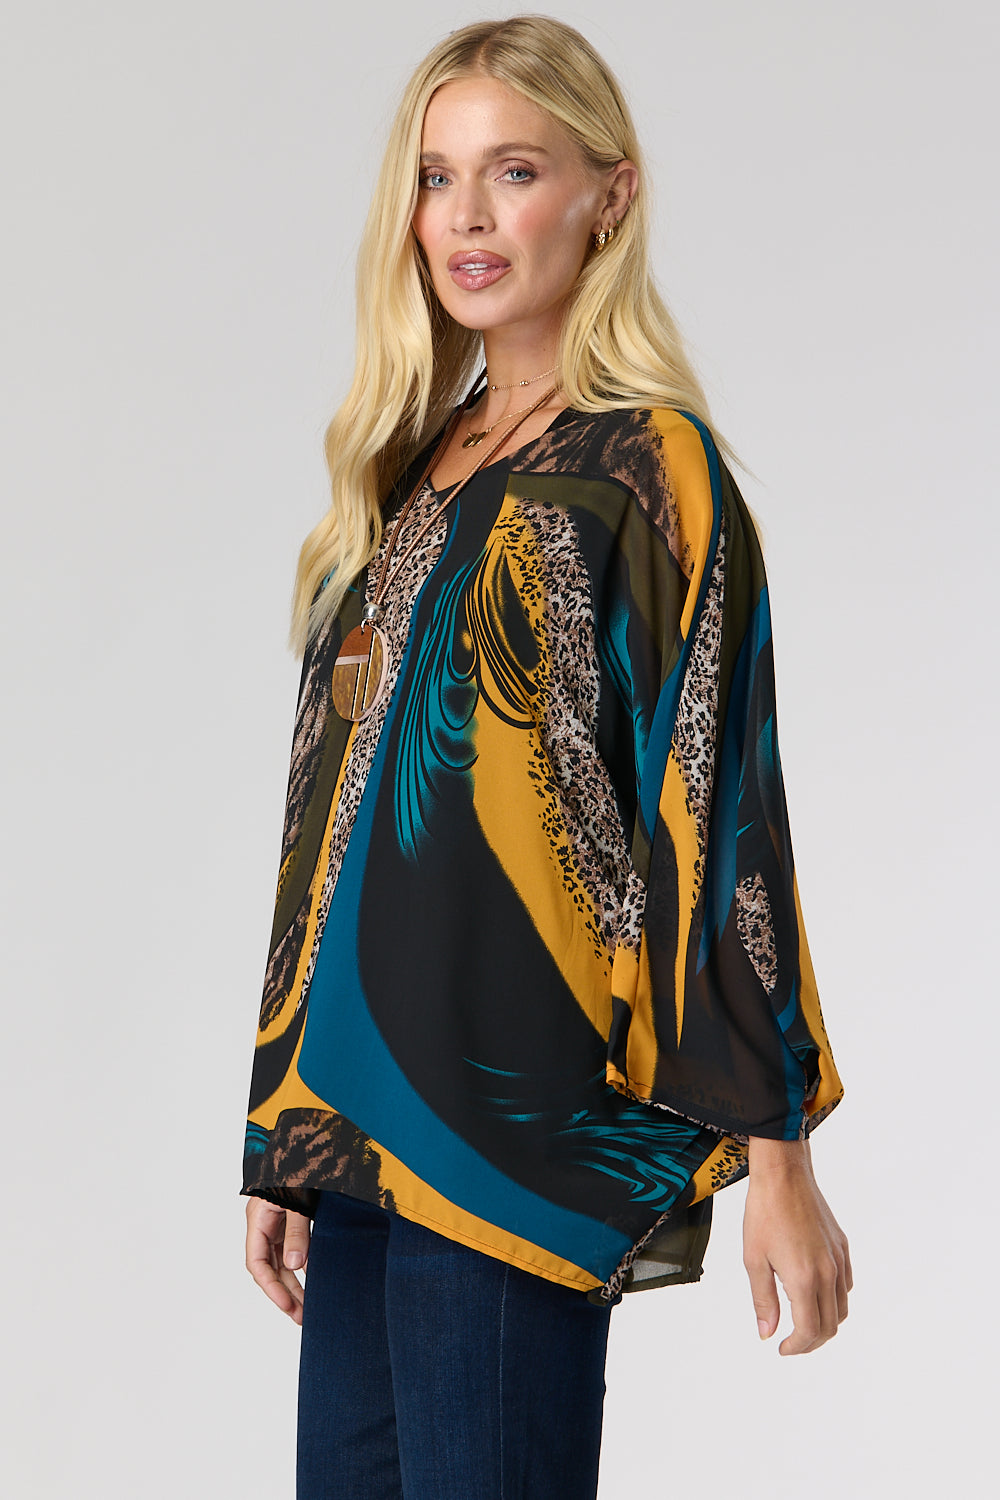 Saloos Batwing Shape Top with Necklace